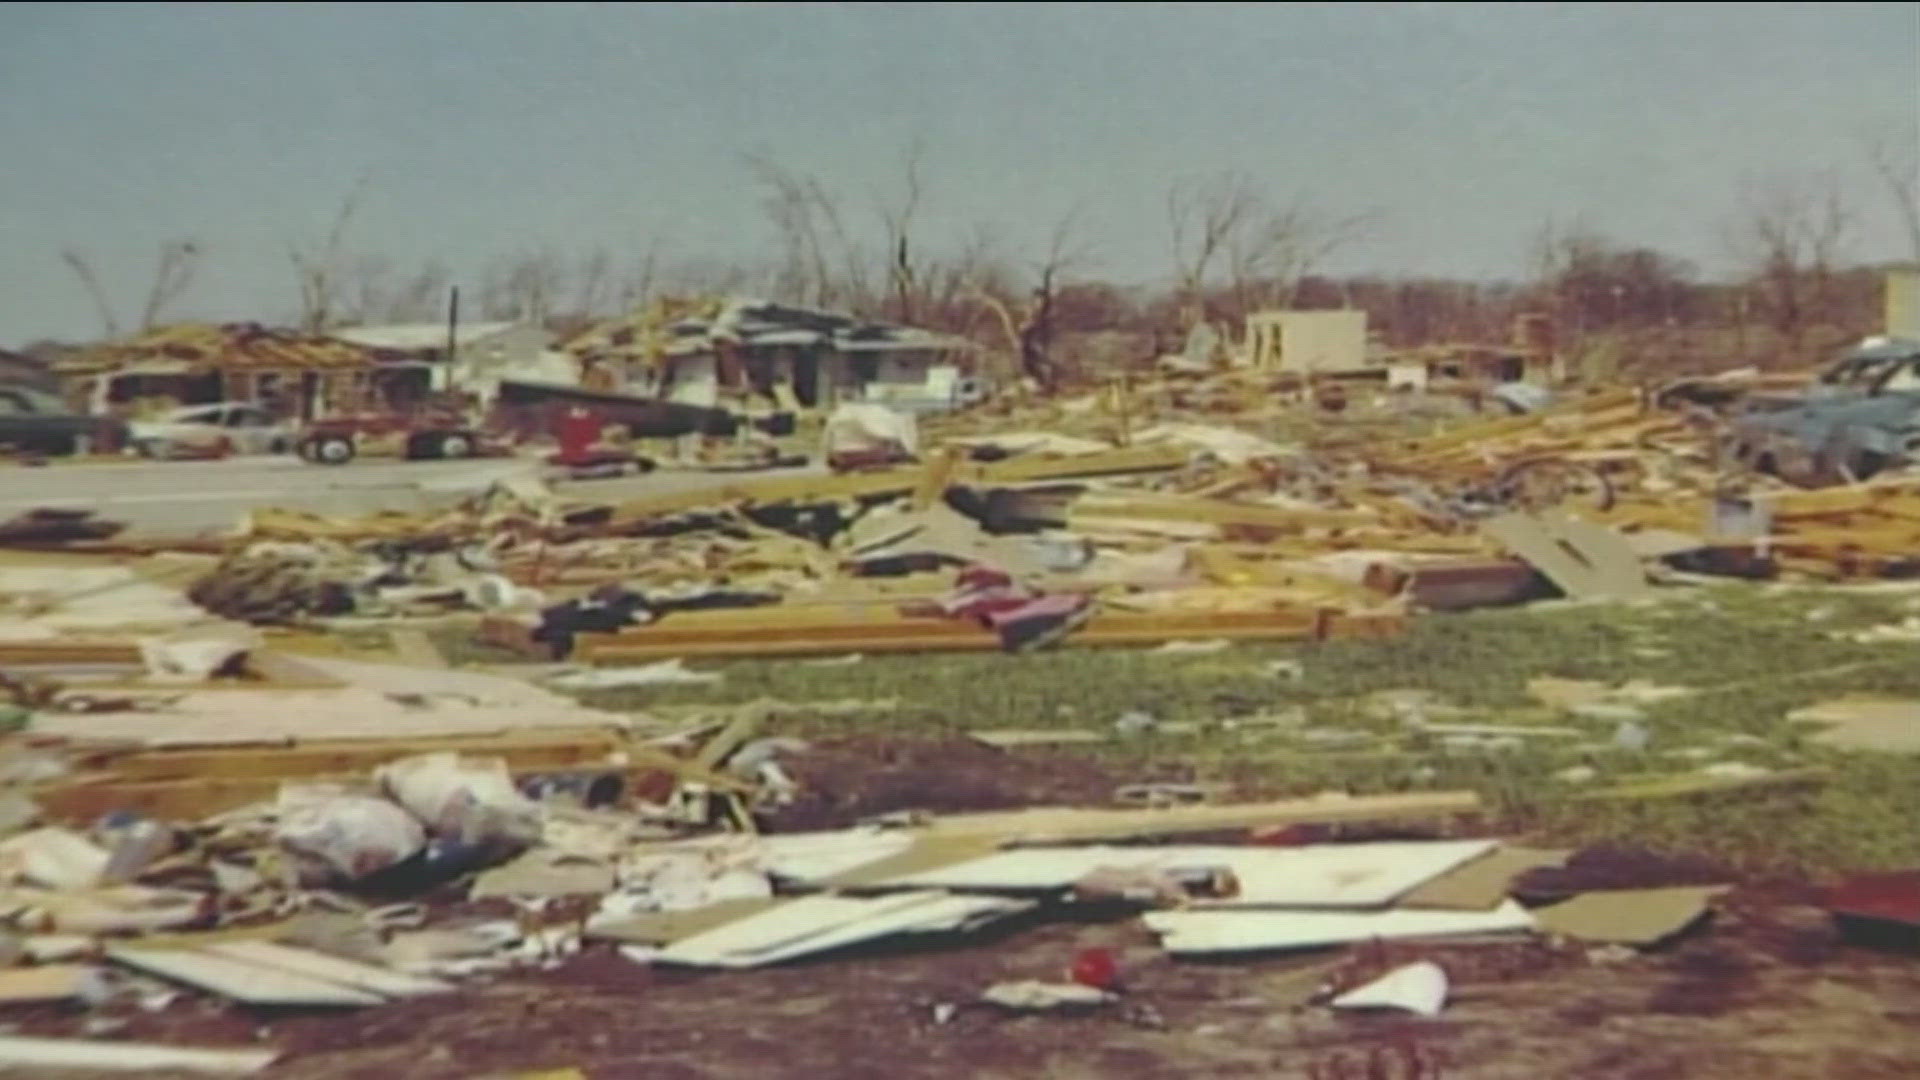 Thirteen people were killed after six tornadoes hit the Twin Cities on May 6, 1965.